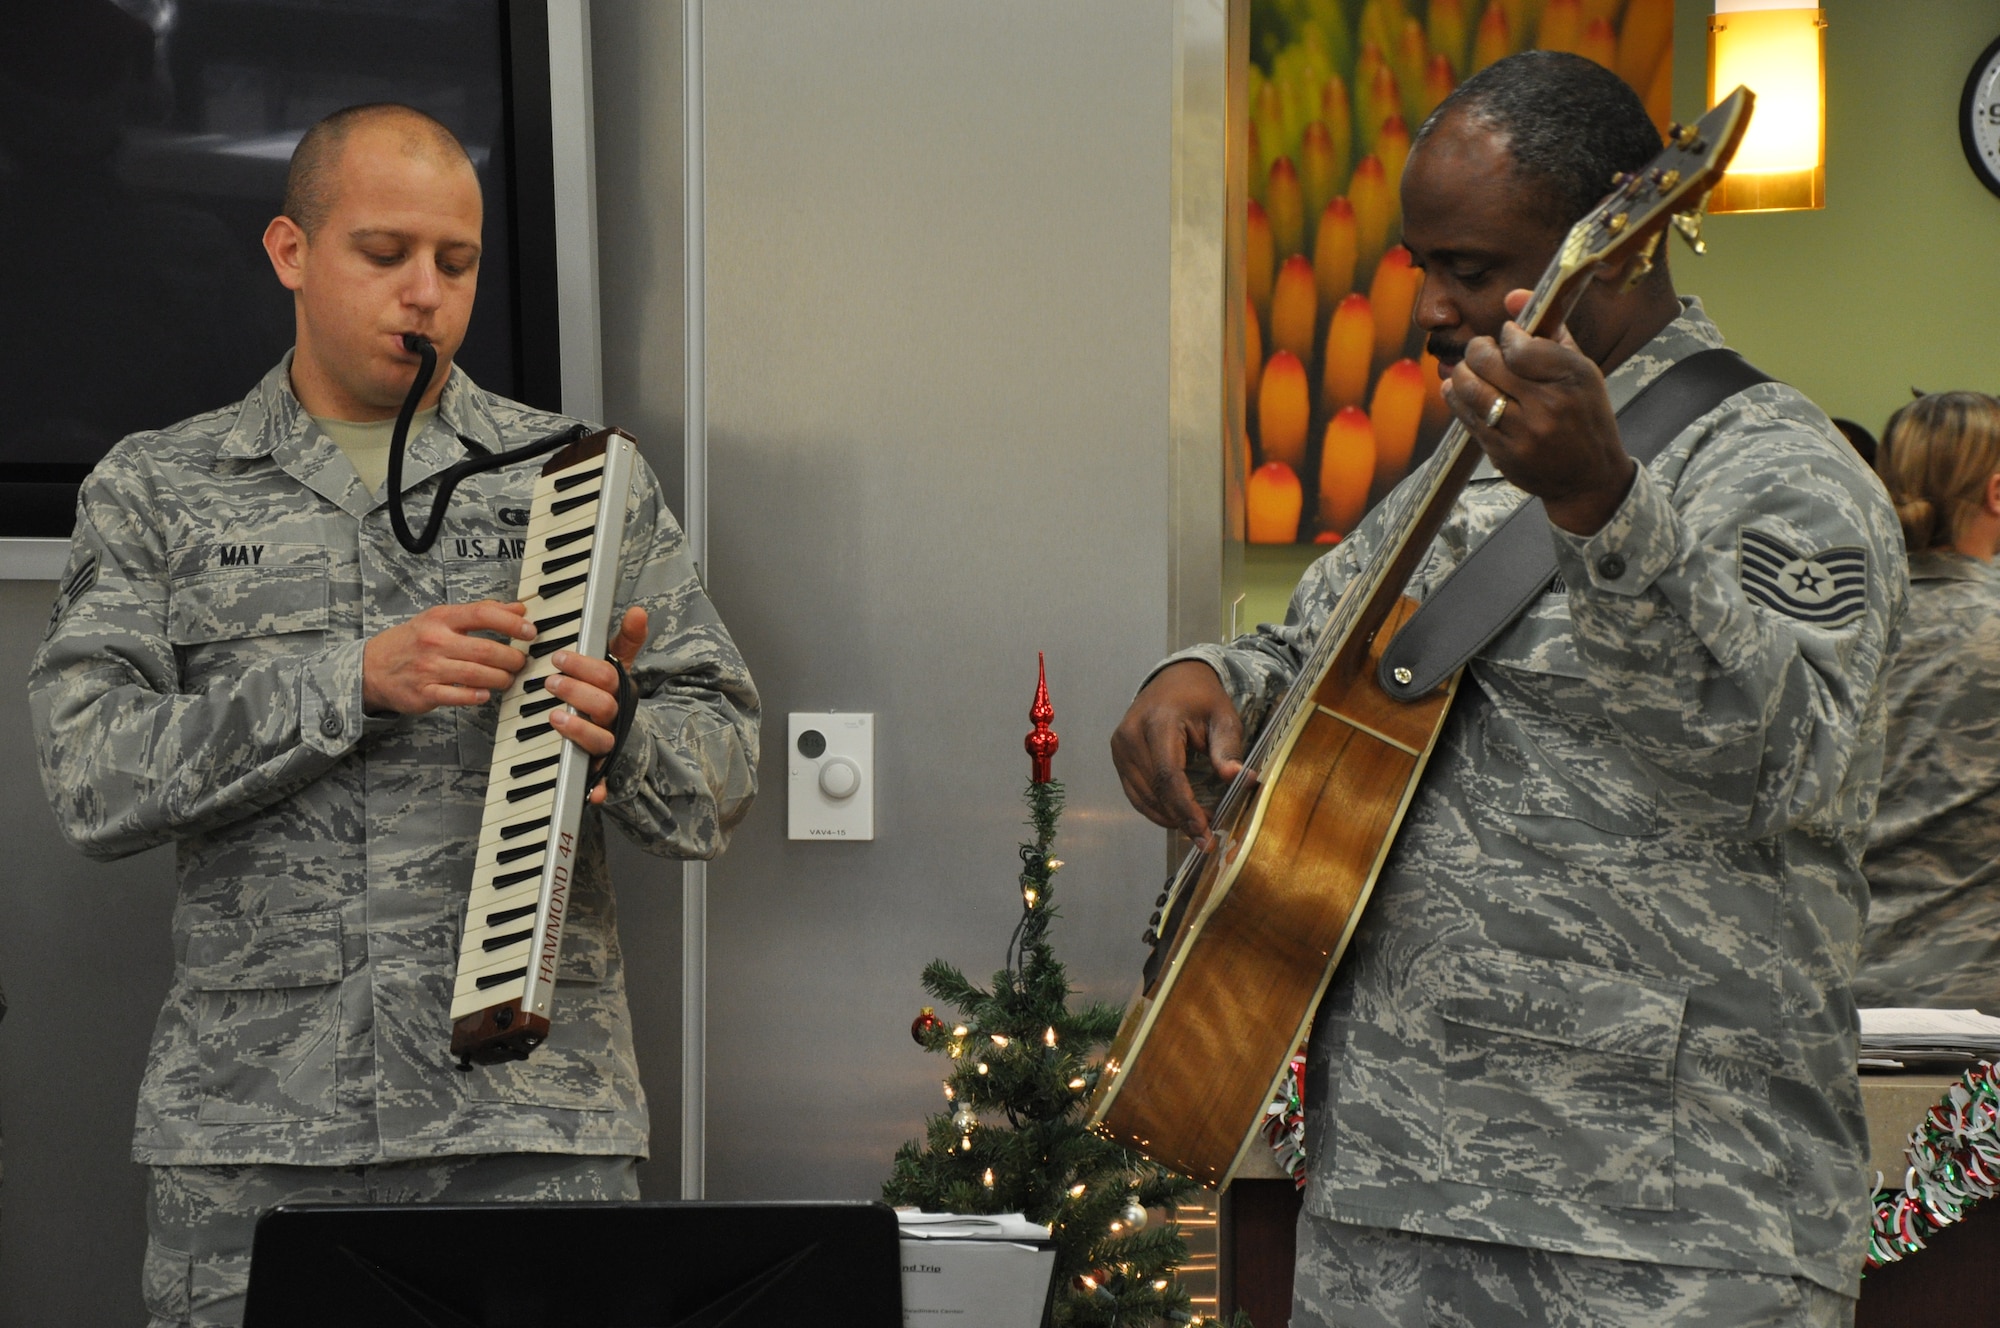 Senior Airman Brandon May plays the melodica and Tech. Sgt. Terry J. Grace strums the bass while they perform holiday songs for the medical clinic at Beale Air Force Base Calif., Dec. 14, 2011. Both are members of the rock band Mobility based out of Travis AFB. (U.S. Air Force photo by Staff Sgt. Robert M. Trujillo/Released)